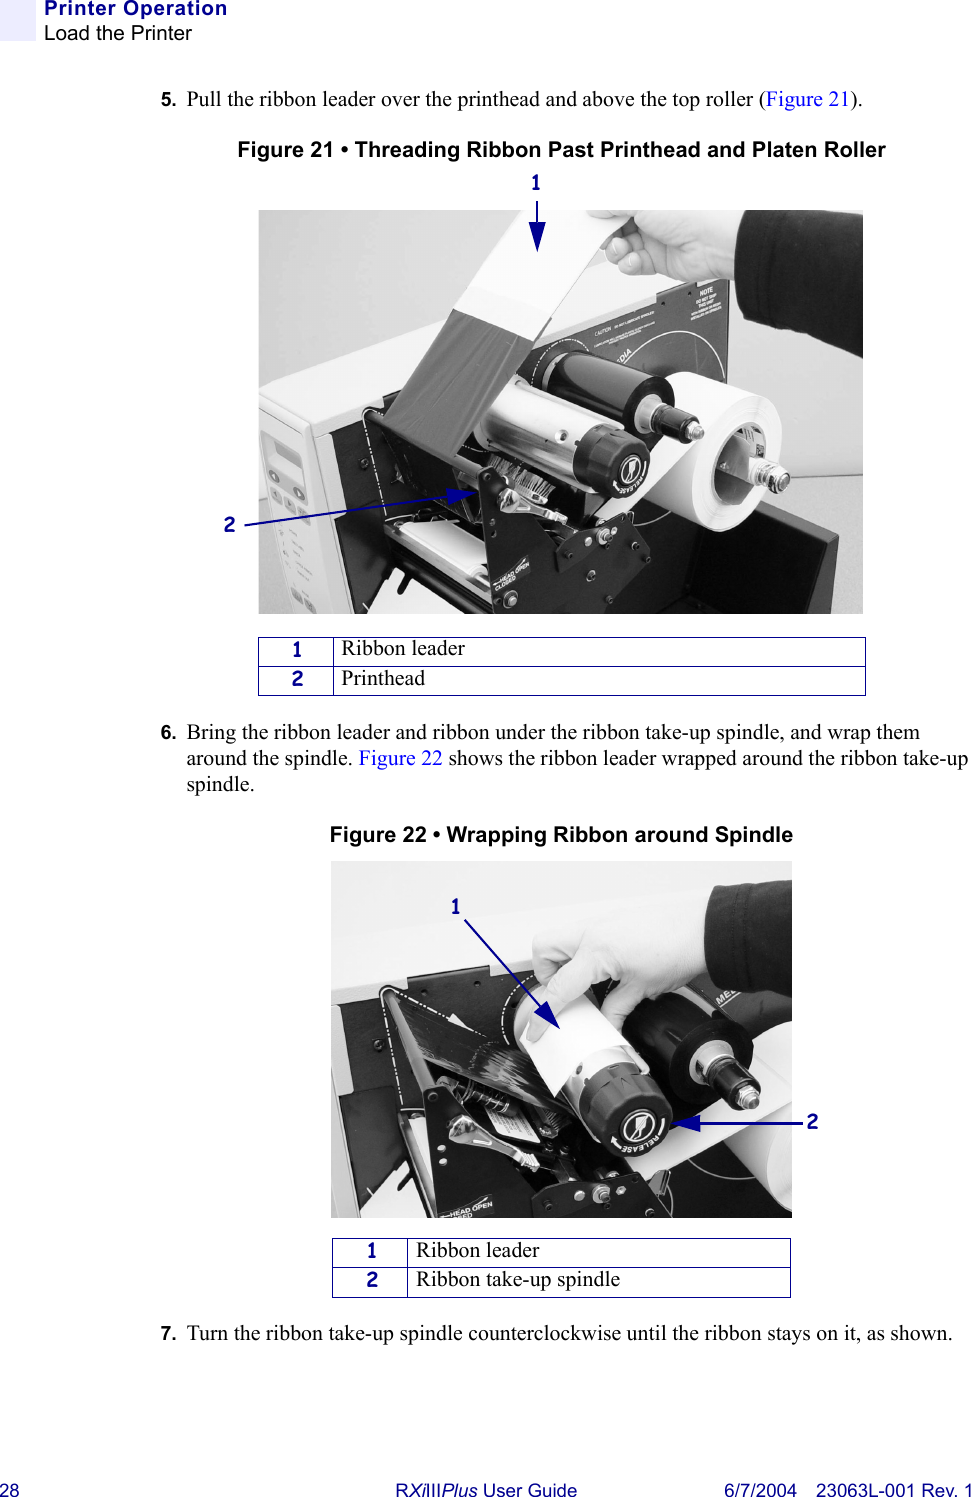 28 RXiIIIPlus User Guide 6/7/2004 23063L-001 Rev. 1Printer OperationLoad the Printer5. Pull the ribbon leader over the printhead and above the top roller (Figure 21).Figure 21 • Threading Ribbon Past Printhead and Platen Roller6. Bring the ribbon leader and ribbon under the ribbon take-up spindle, and wrap them around the spindle. Figure 22 shows the ribbon leader wrapped around the ribbon take-up spindle.Figure 22 • Wrapping Ribbon around Spindle7. Turn the ribbon take-up spindle counterclockwise until the ribbon stays on it, as shown.1Ribbon leader2Printhead1Ribbon leader2Ribbon take-up spindle1212